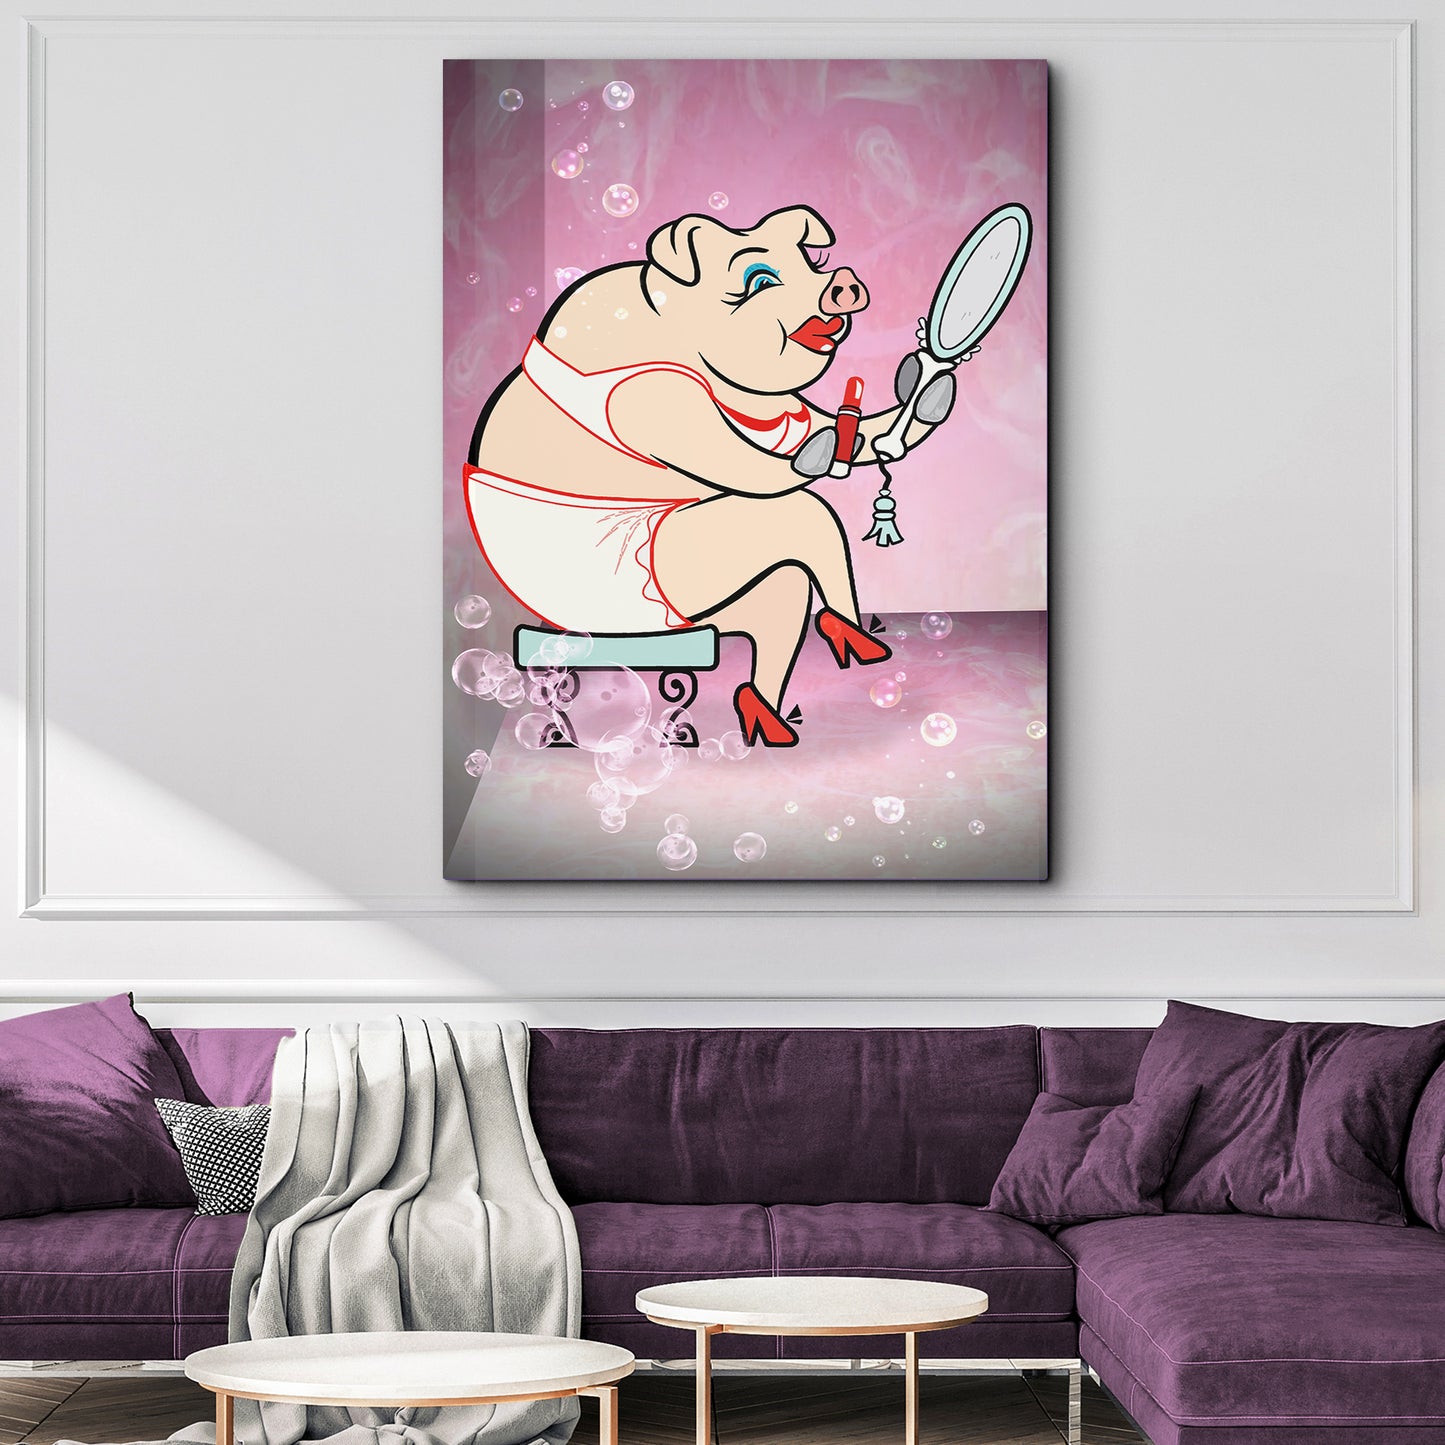 Sassy Pig Portrait Canvas Wall Art Style 2 - Image by Tailored Canvases